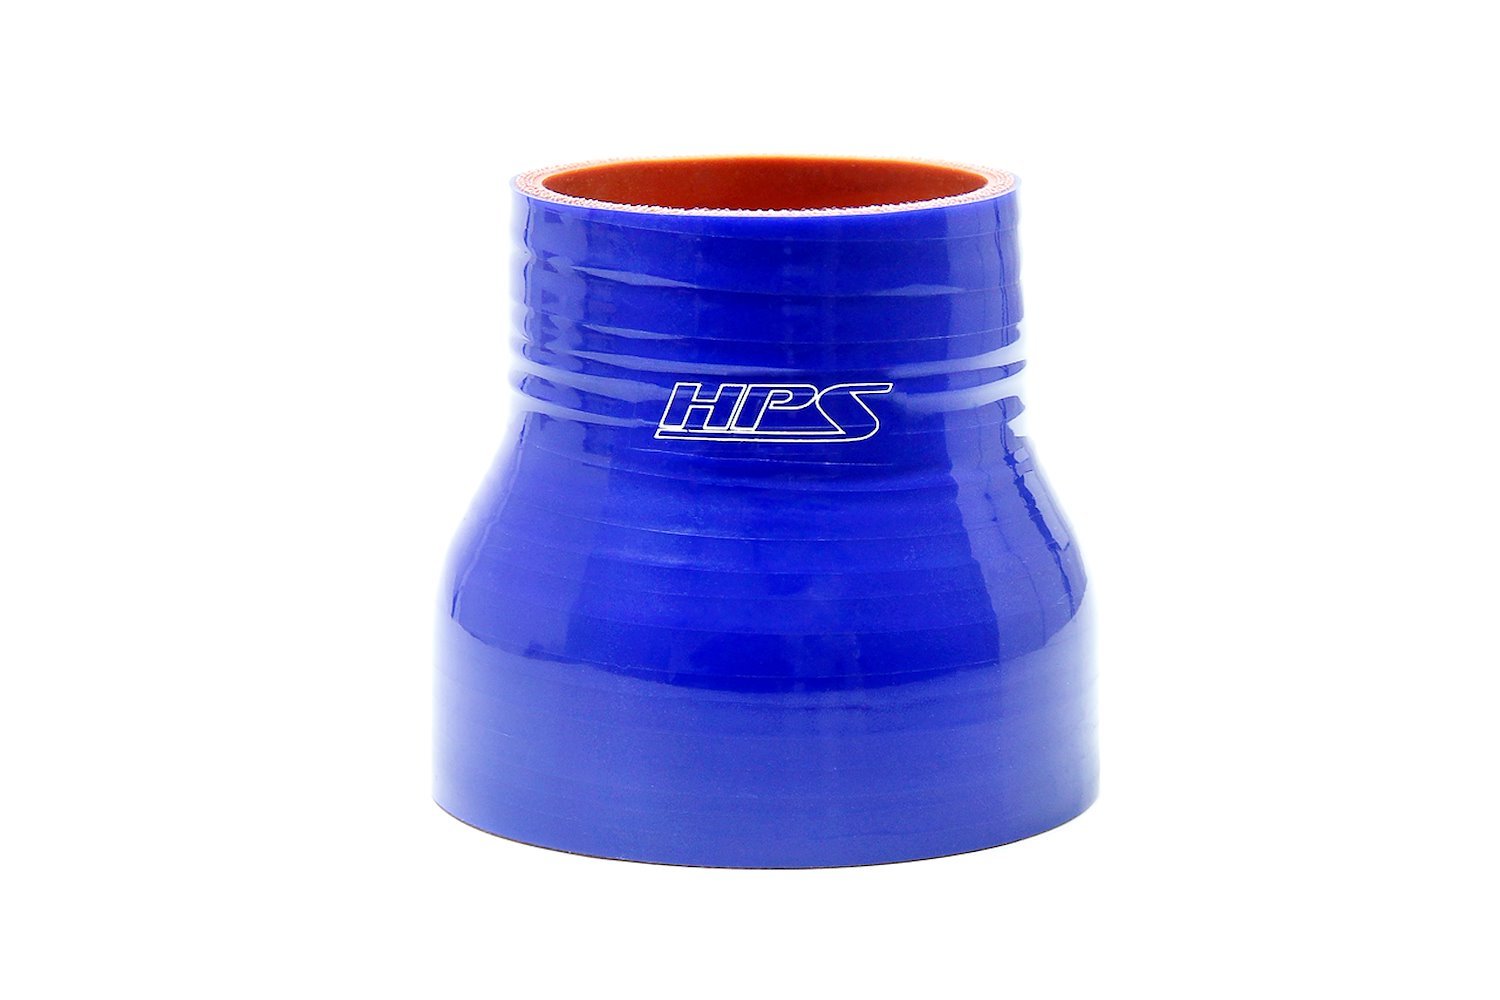 HTSR-200-250-L4-BLUE Silicone Reducer Hose, High-Temp 4-Ply Reinforced, 2 in. - 2-1/2 in. ID, 4 in. Long, Blue